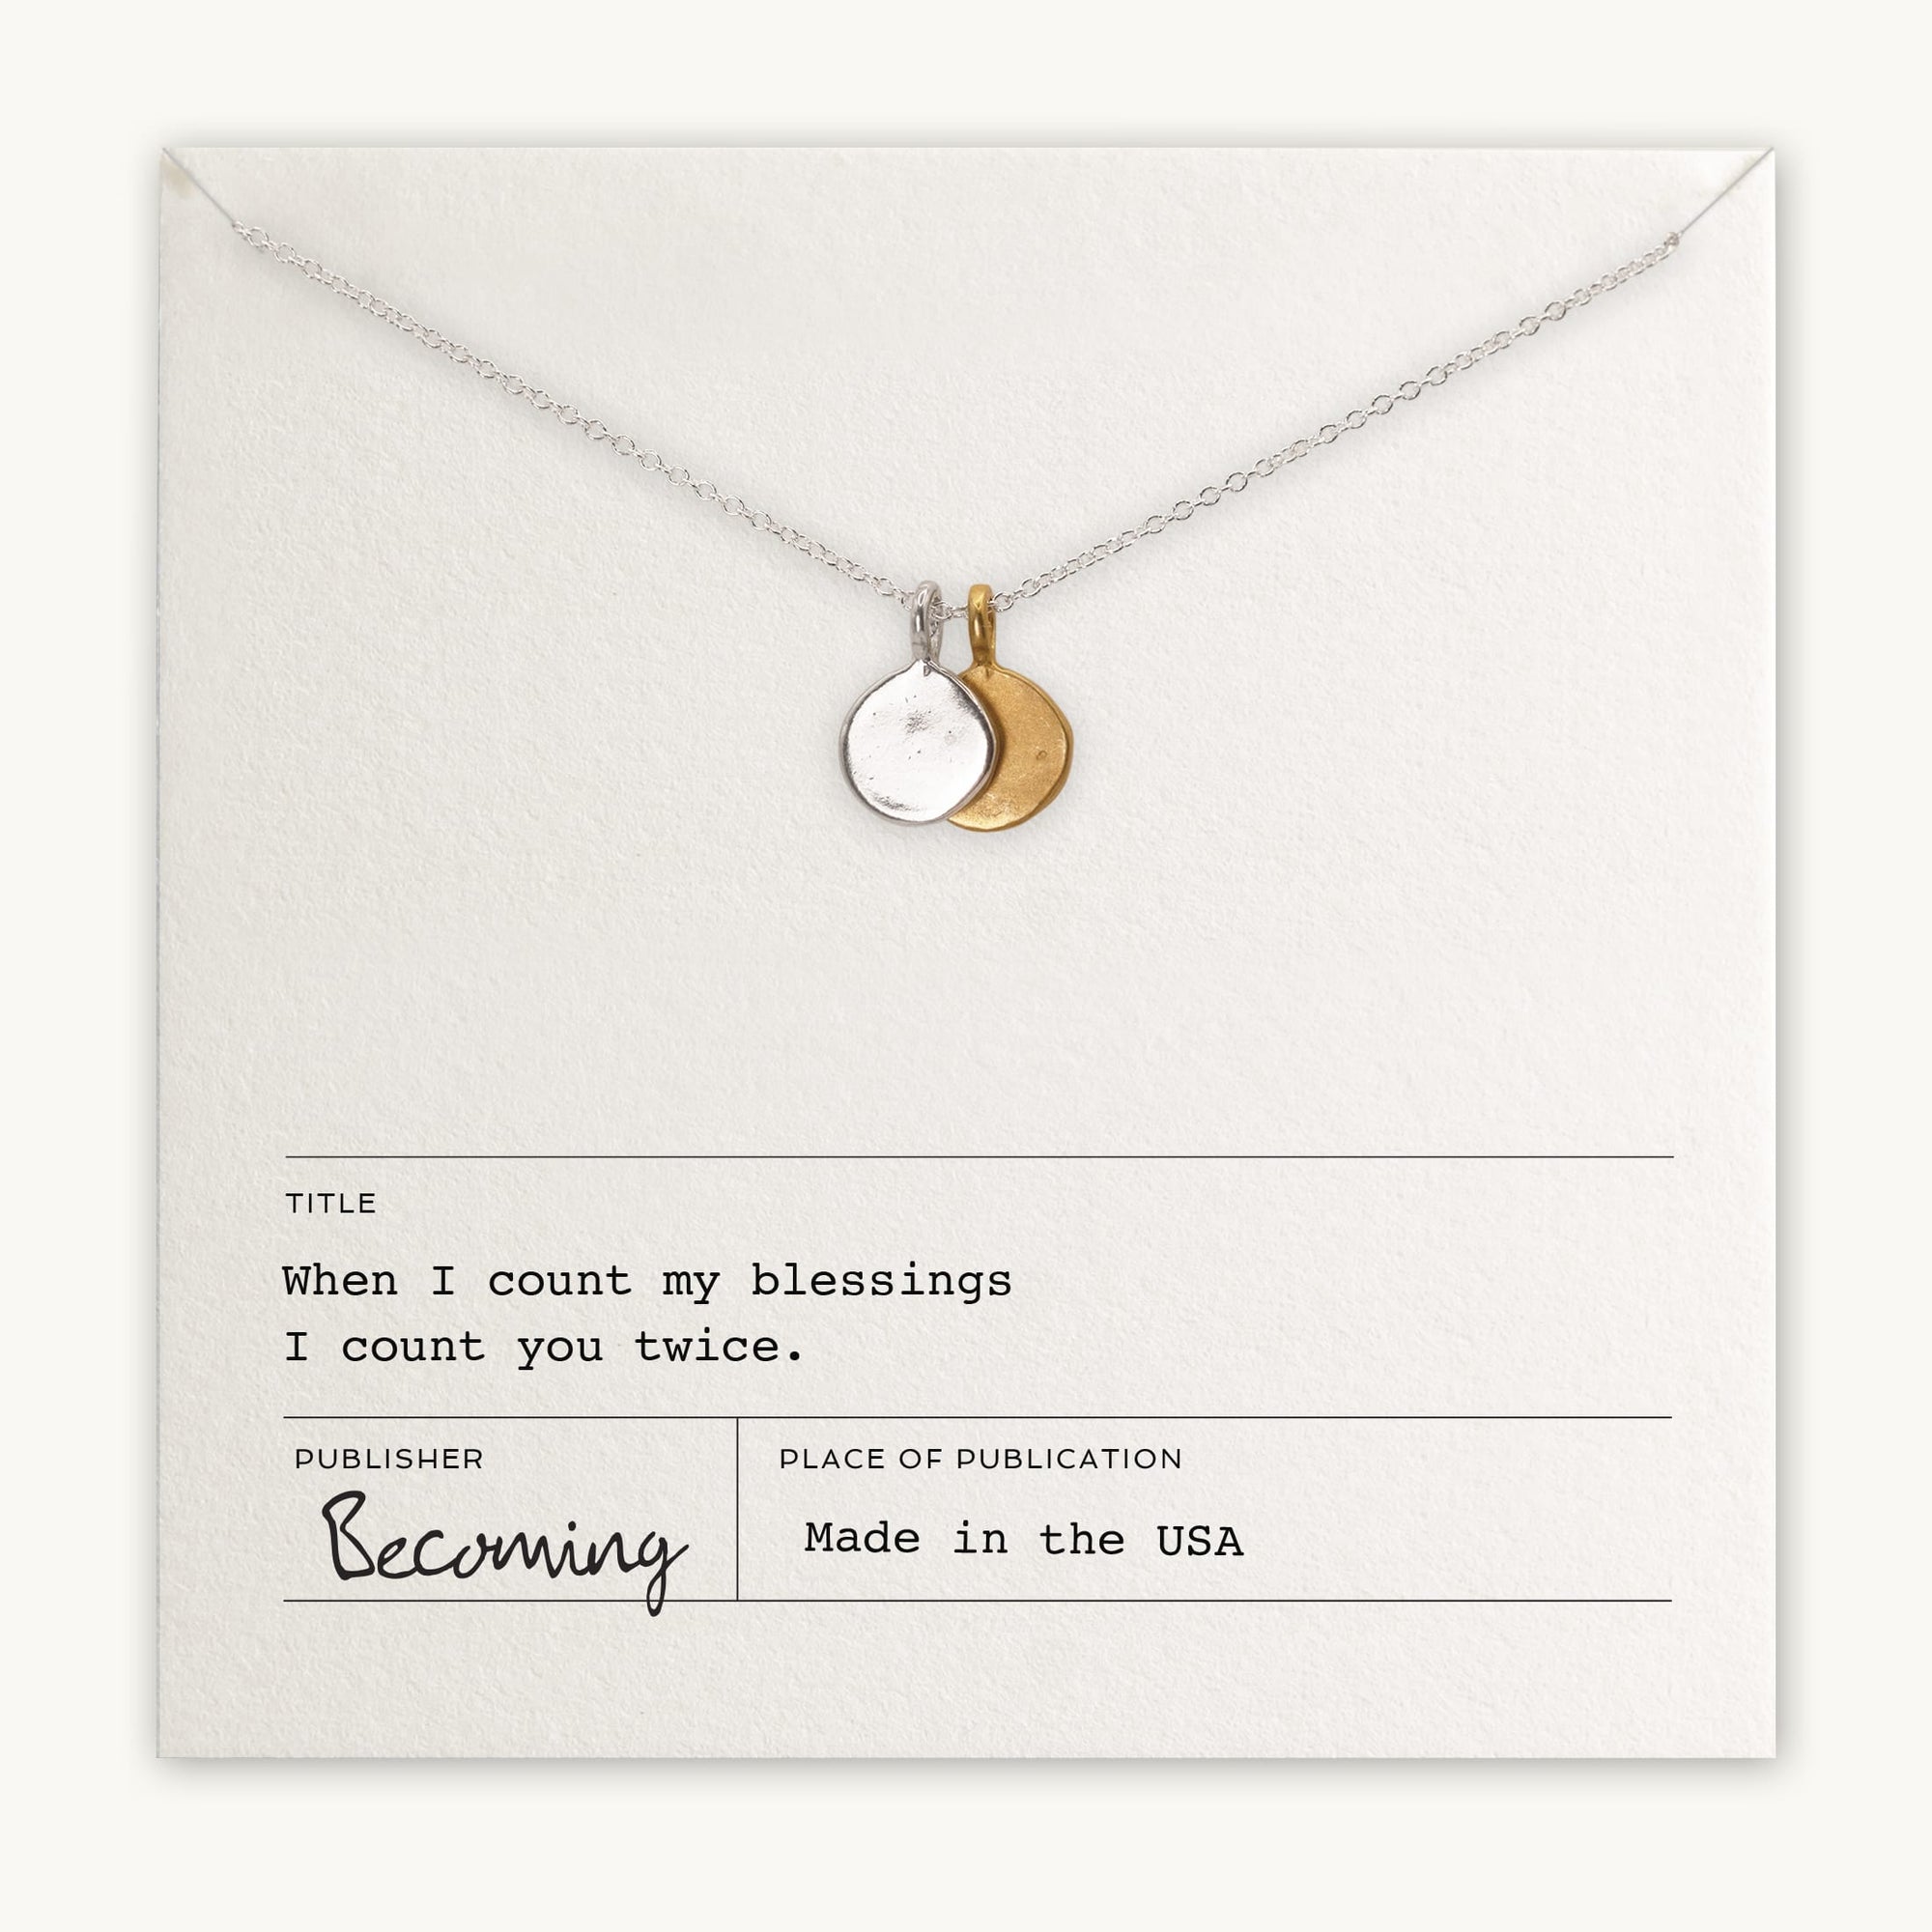 Count My Blessings Necklace by Becoming Jewelry, displayed on a card titled &quot;becoming,&quot; made in the USA.